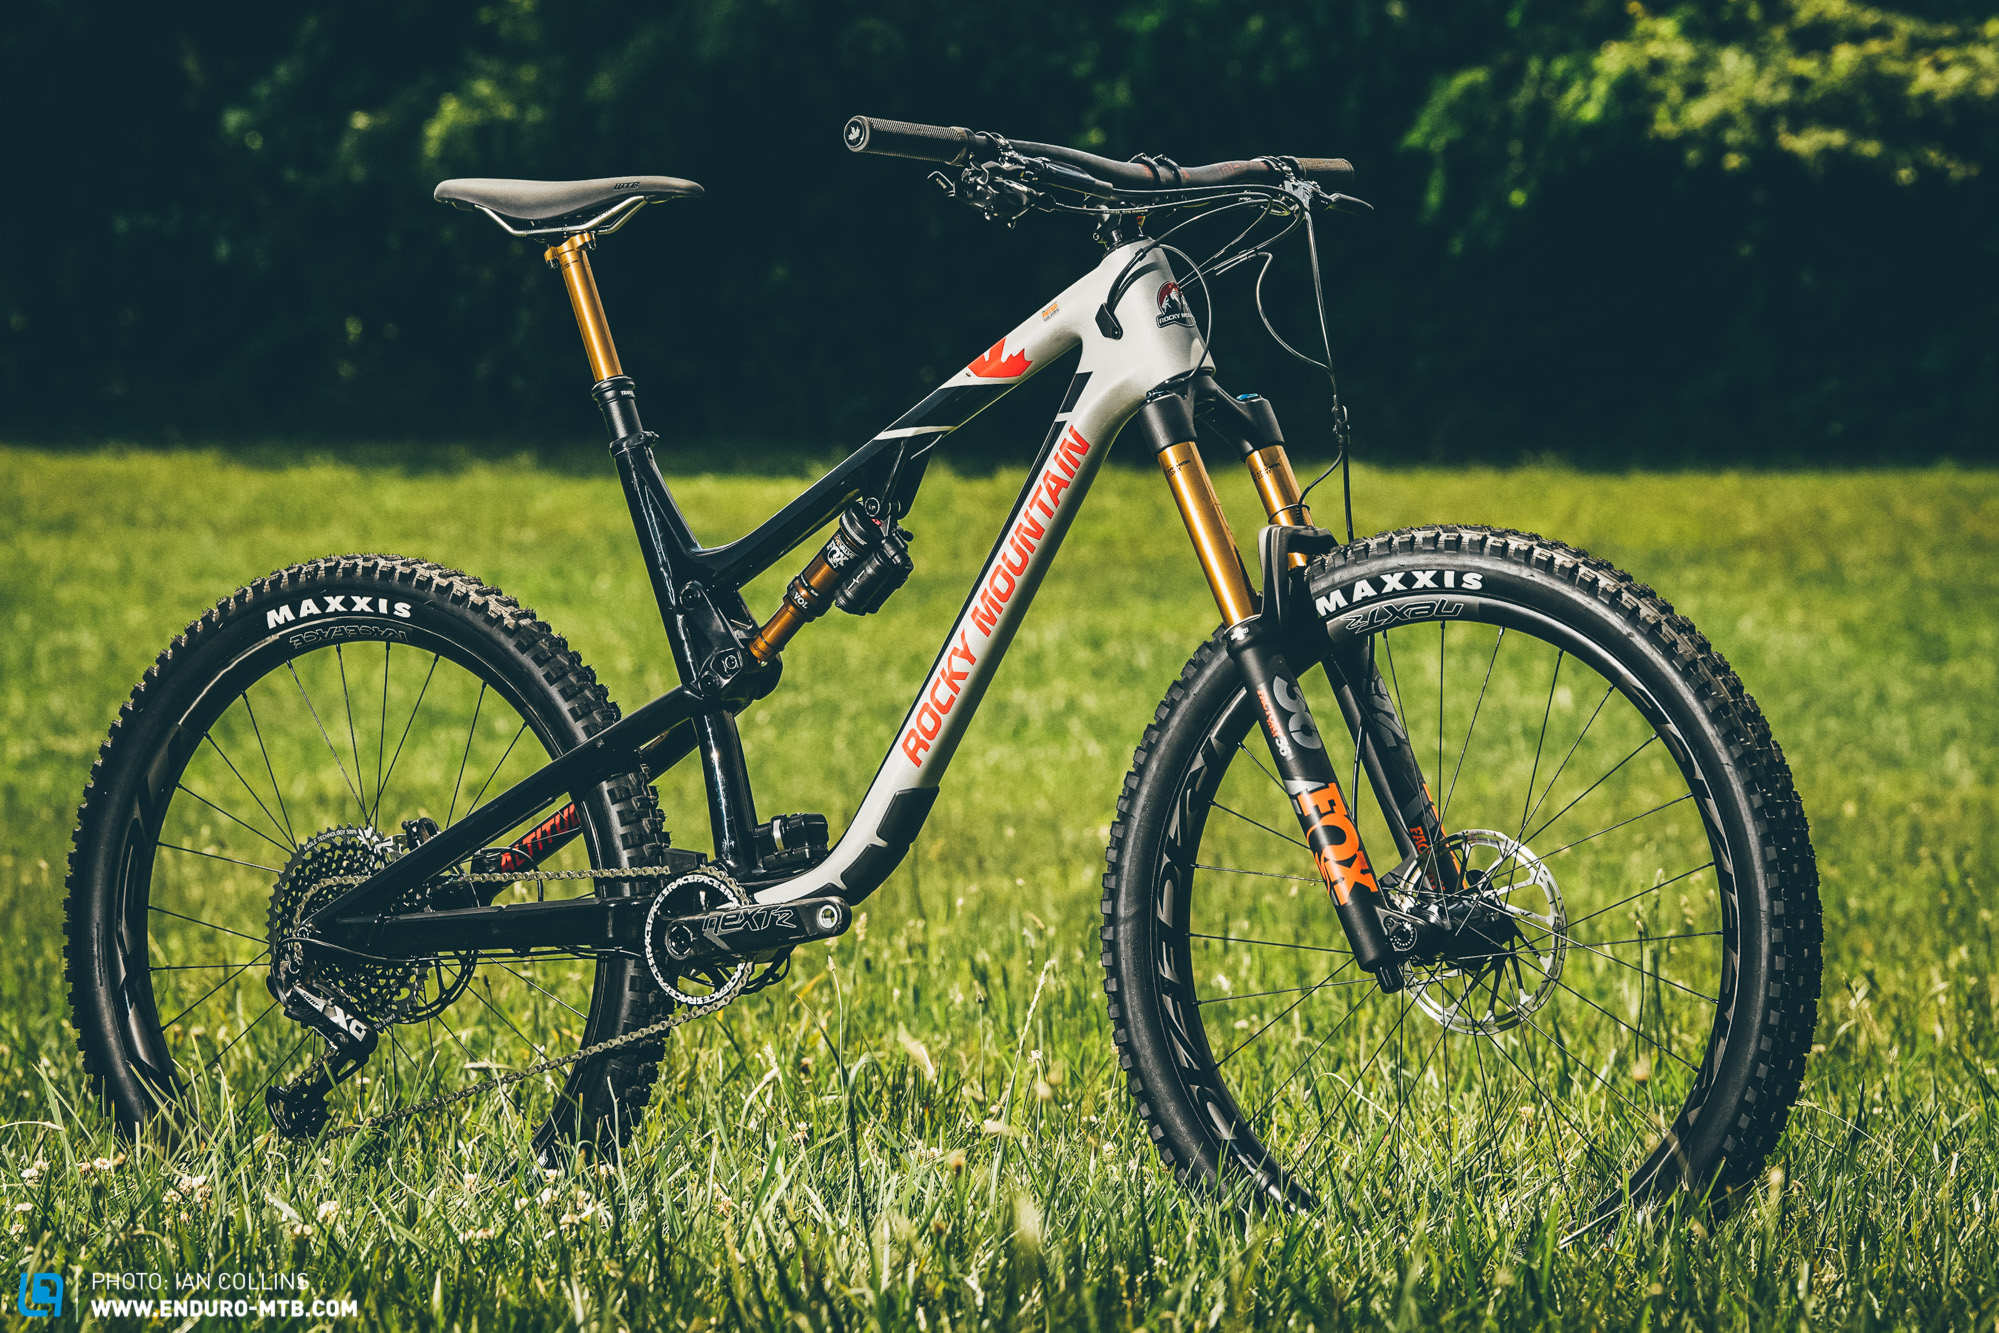 FOX Live Valve review – is this the suspension revolution? | Page